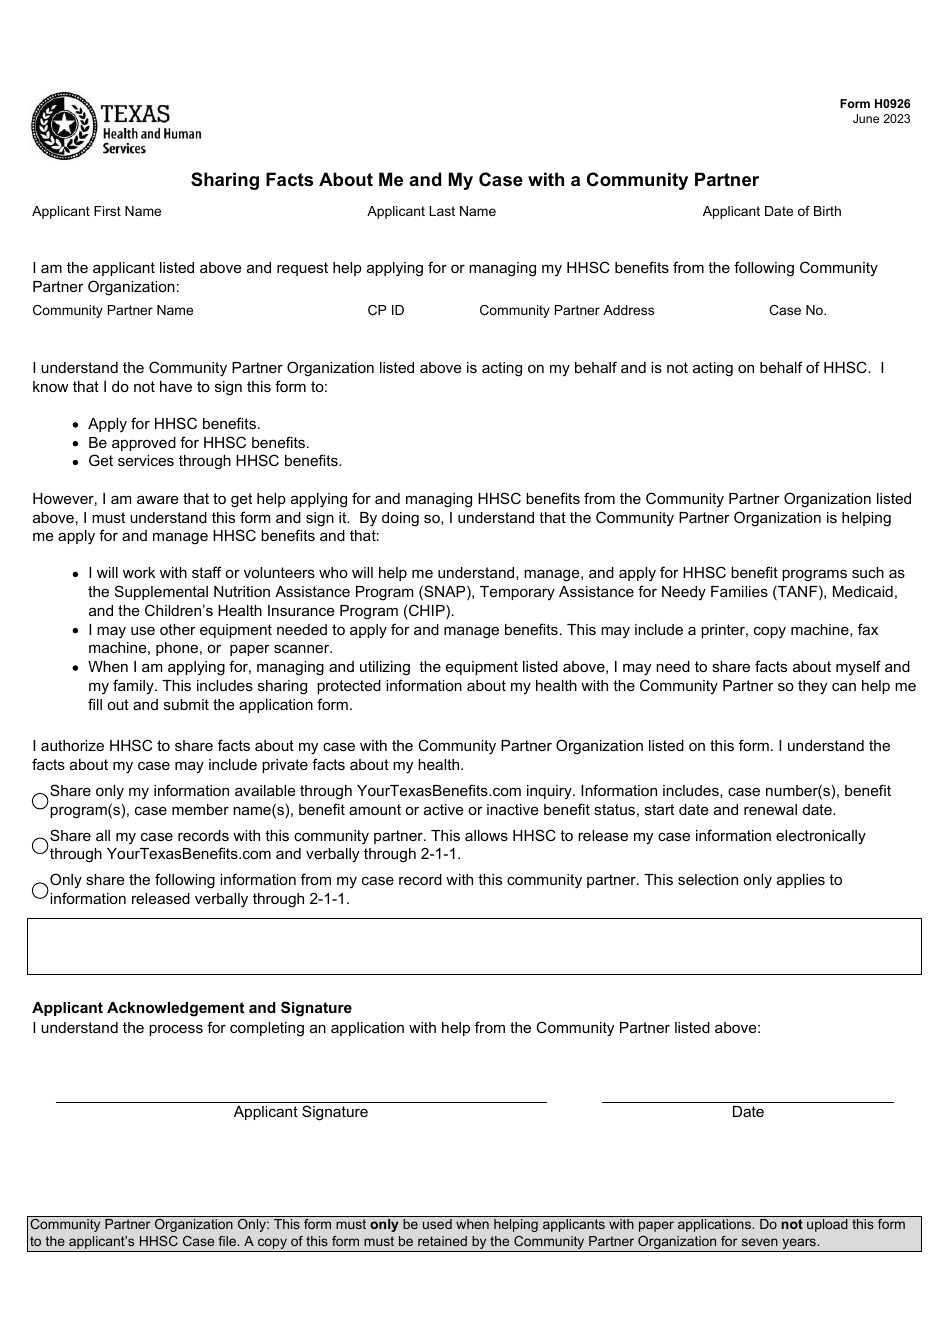 Form H0926 Sharing Facts About Me and My Case With a Community Partner - Texas, Page 1